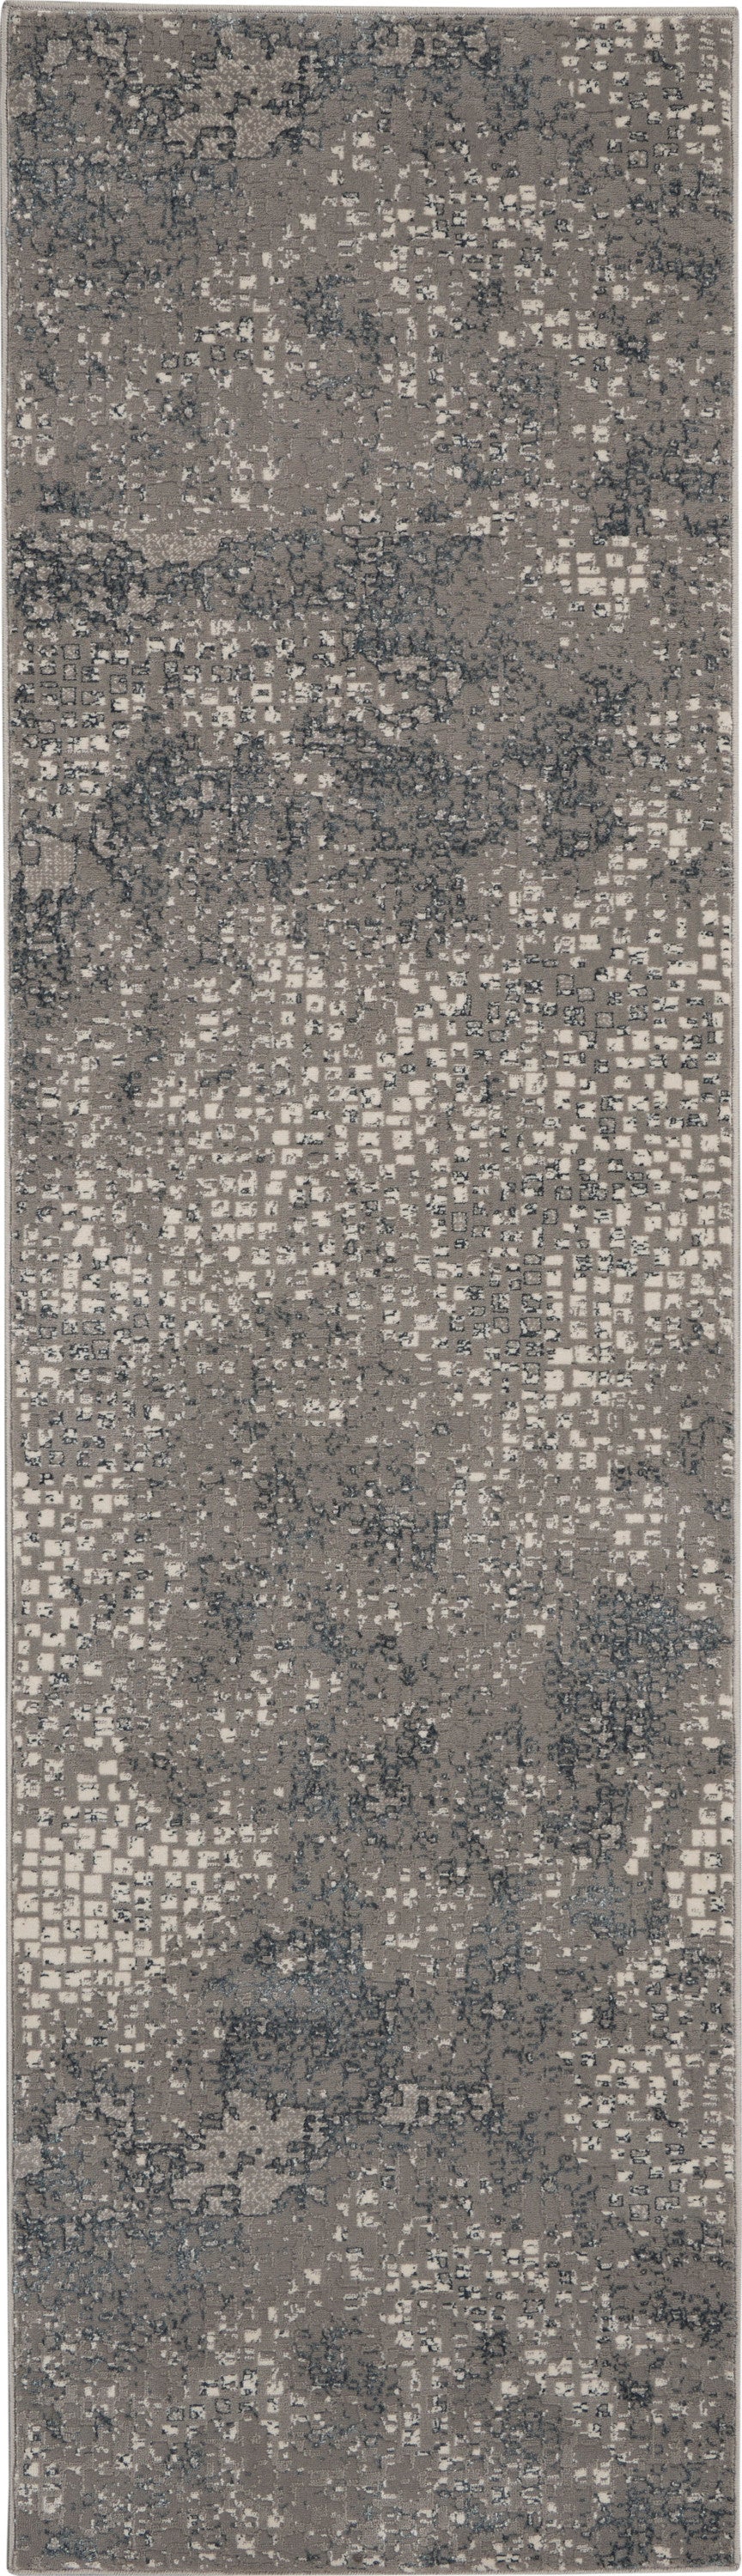 Michael Amini MA90 Uptown UPT02 Grey Contemporary Machinemade Rug